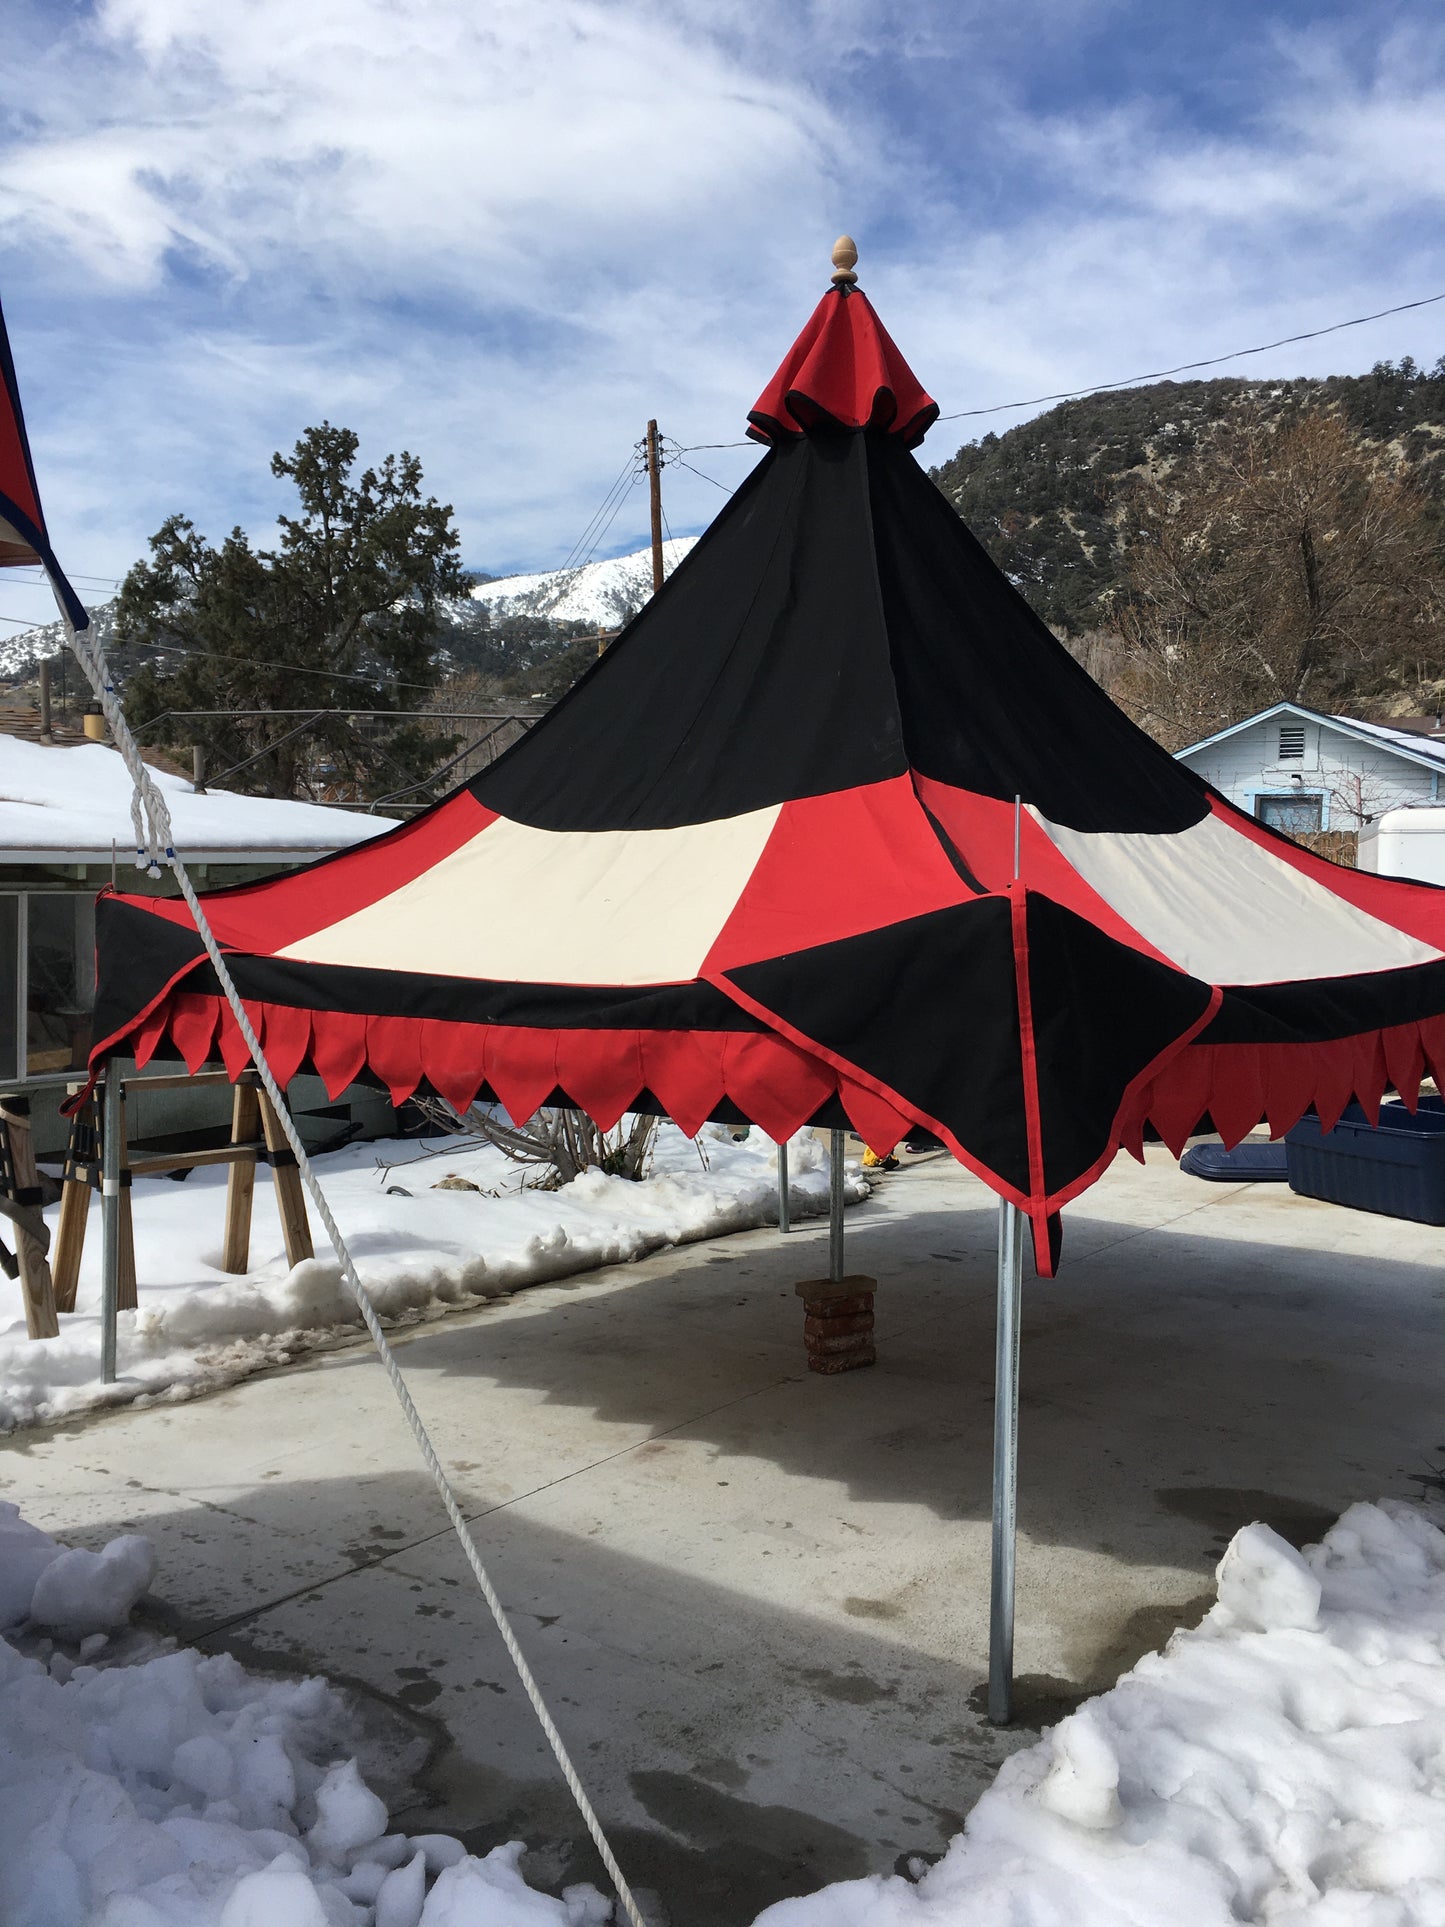 Oakenfoot Faire Tents - 10', 12', 15', 20-foot square, be-spoke "Maker" tent system